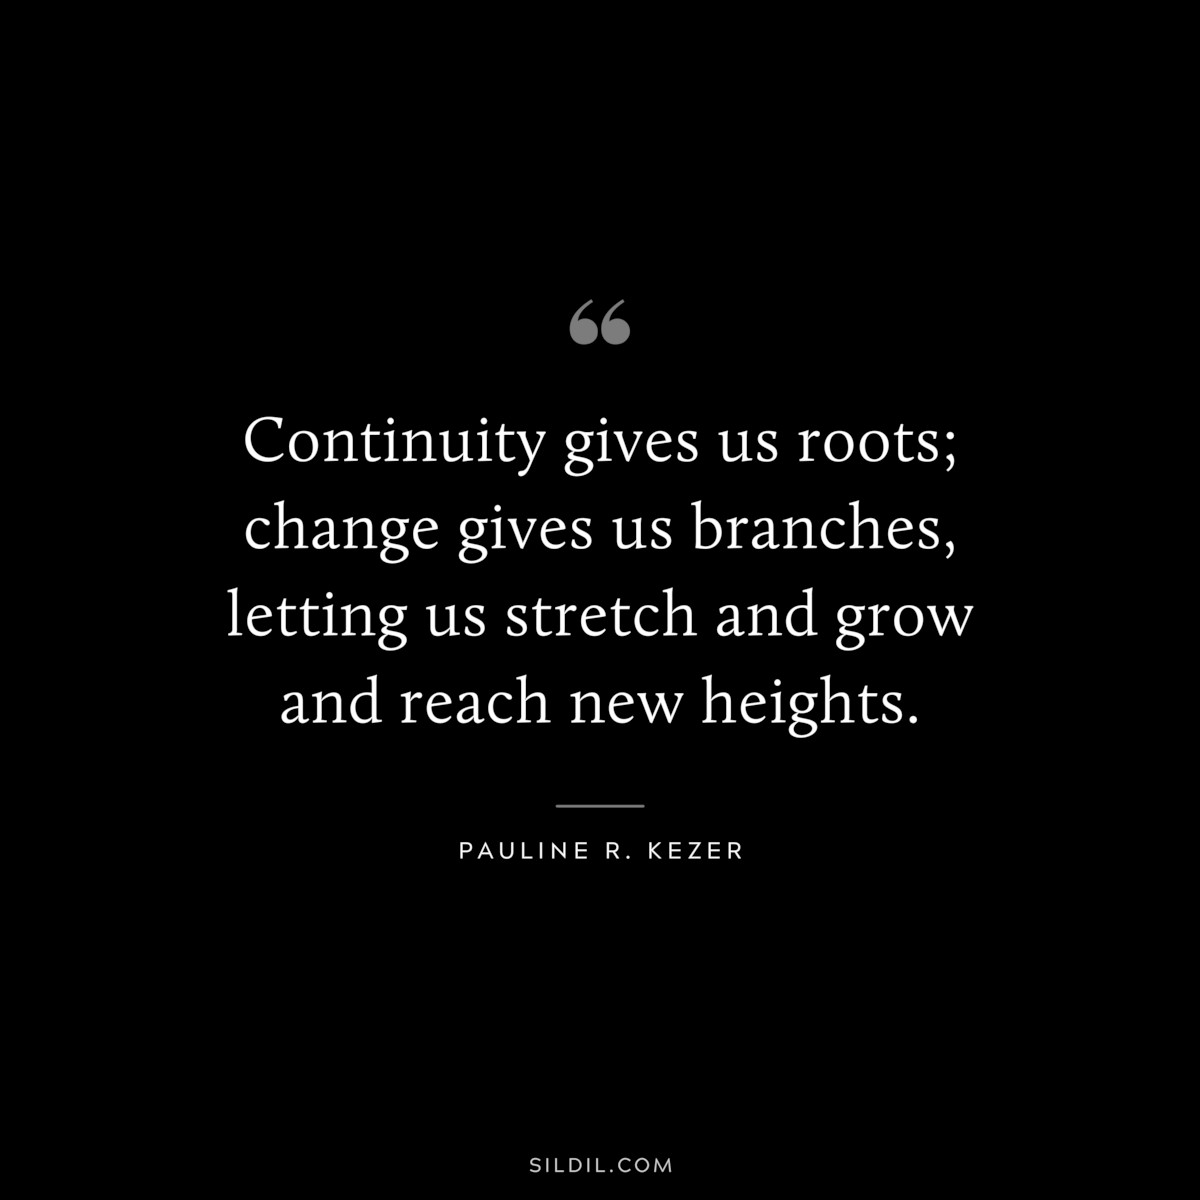 Continuity gives us roots; change gives us branches, letting us stretch and grow and reach new heights. ― Pauline R. Kezer